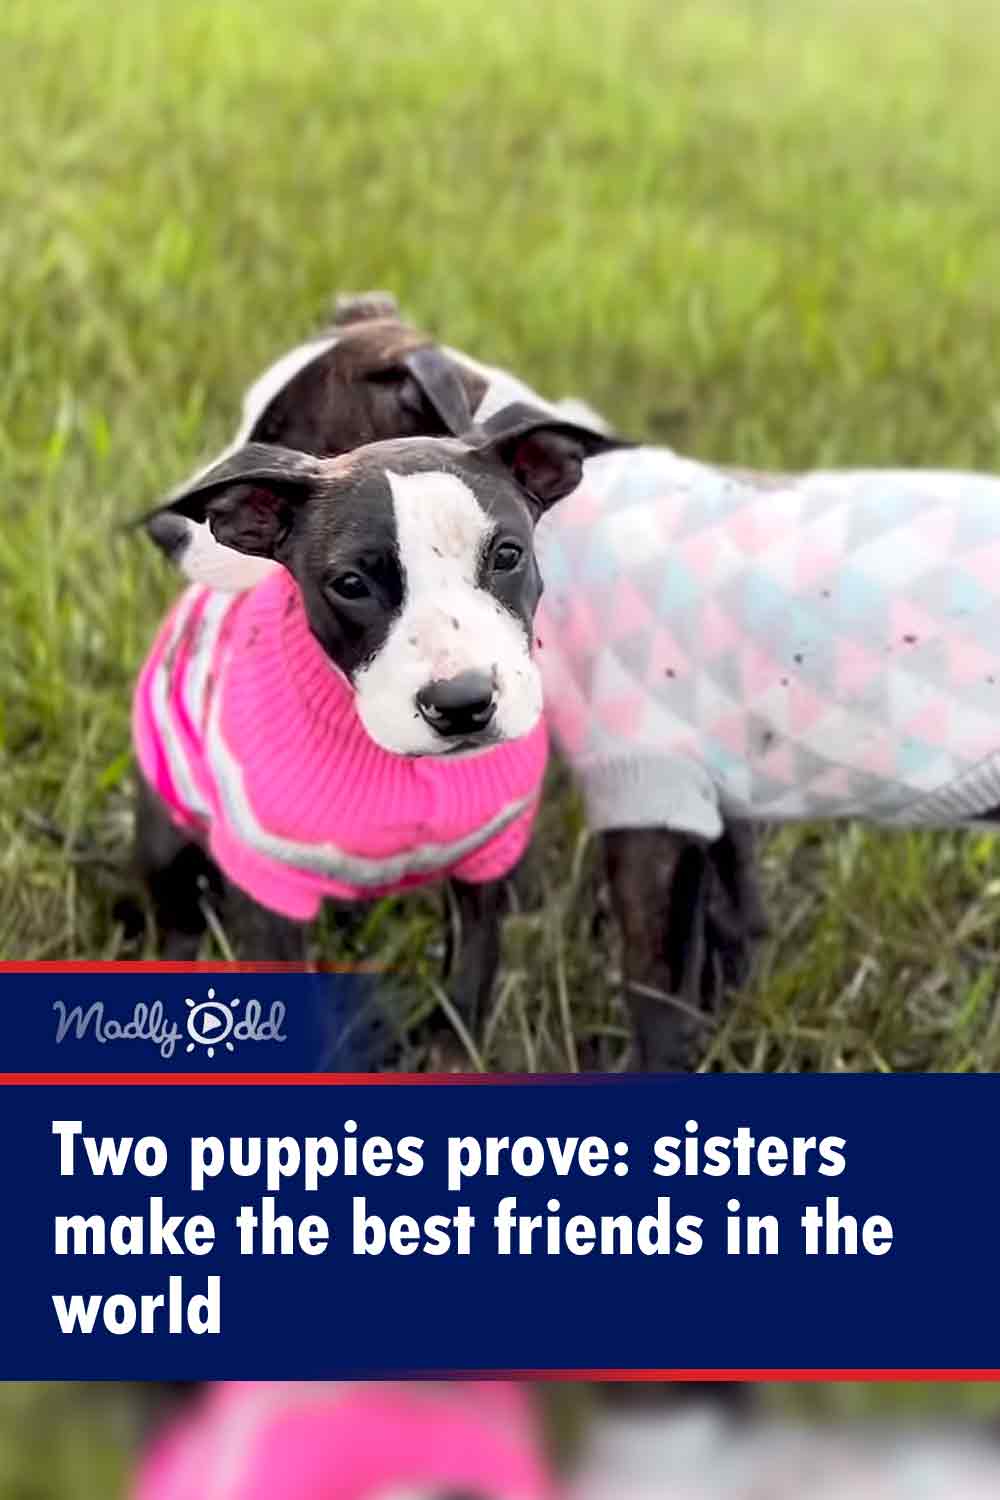 Two puppies prove: sisters make the best friends in the world